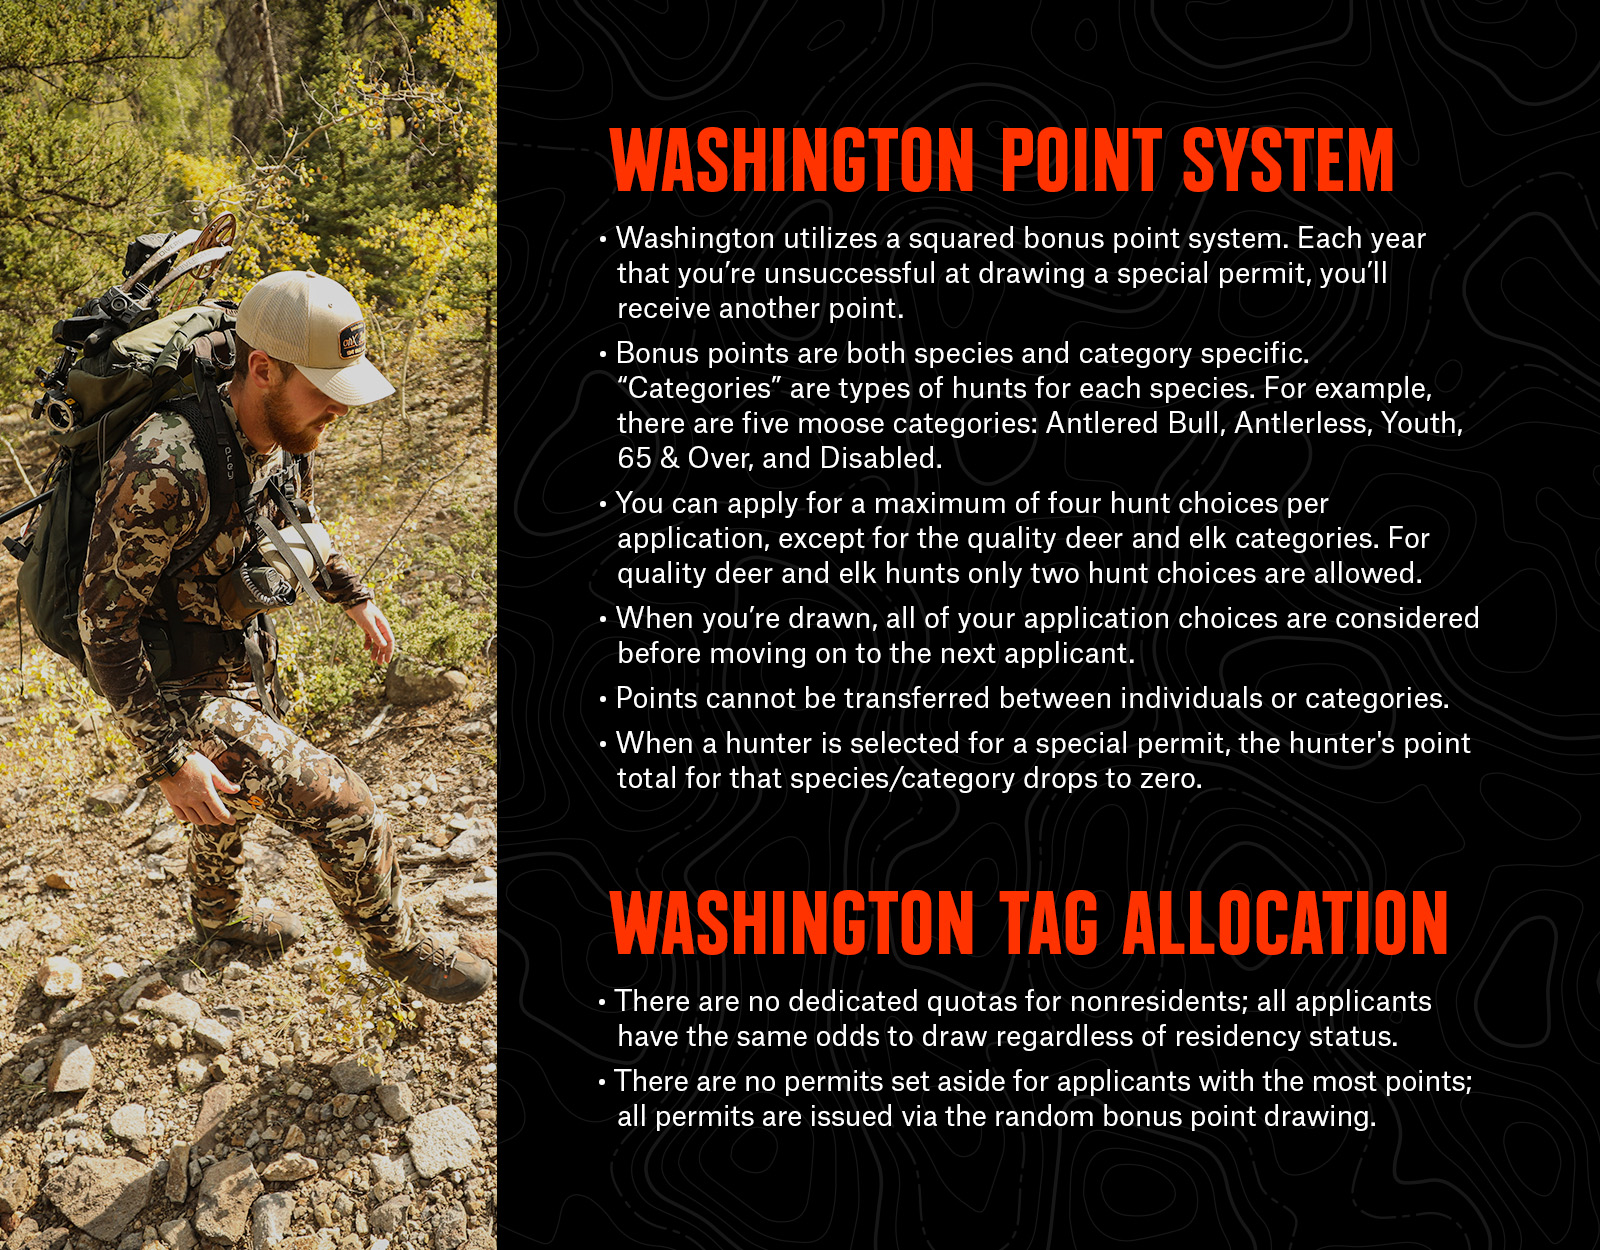 Washington hunting point system and tag allocation